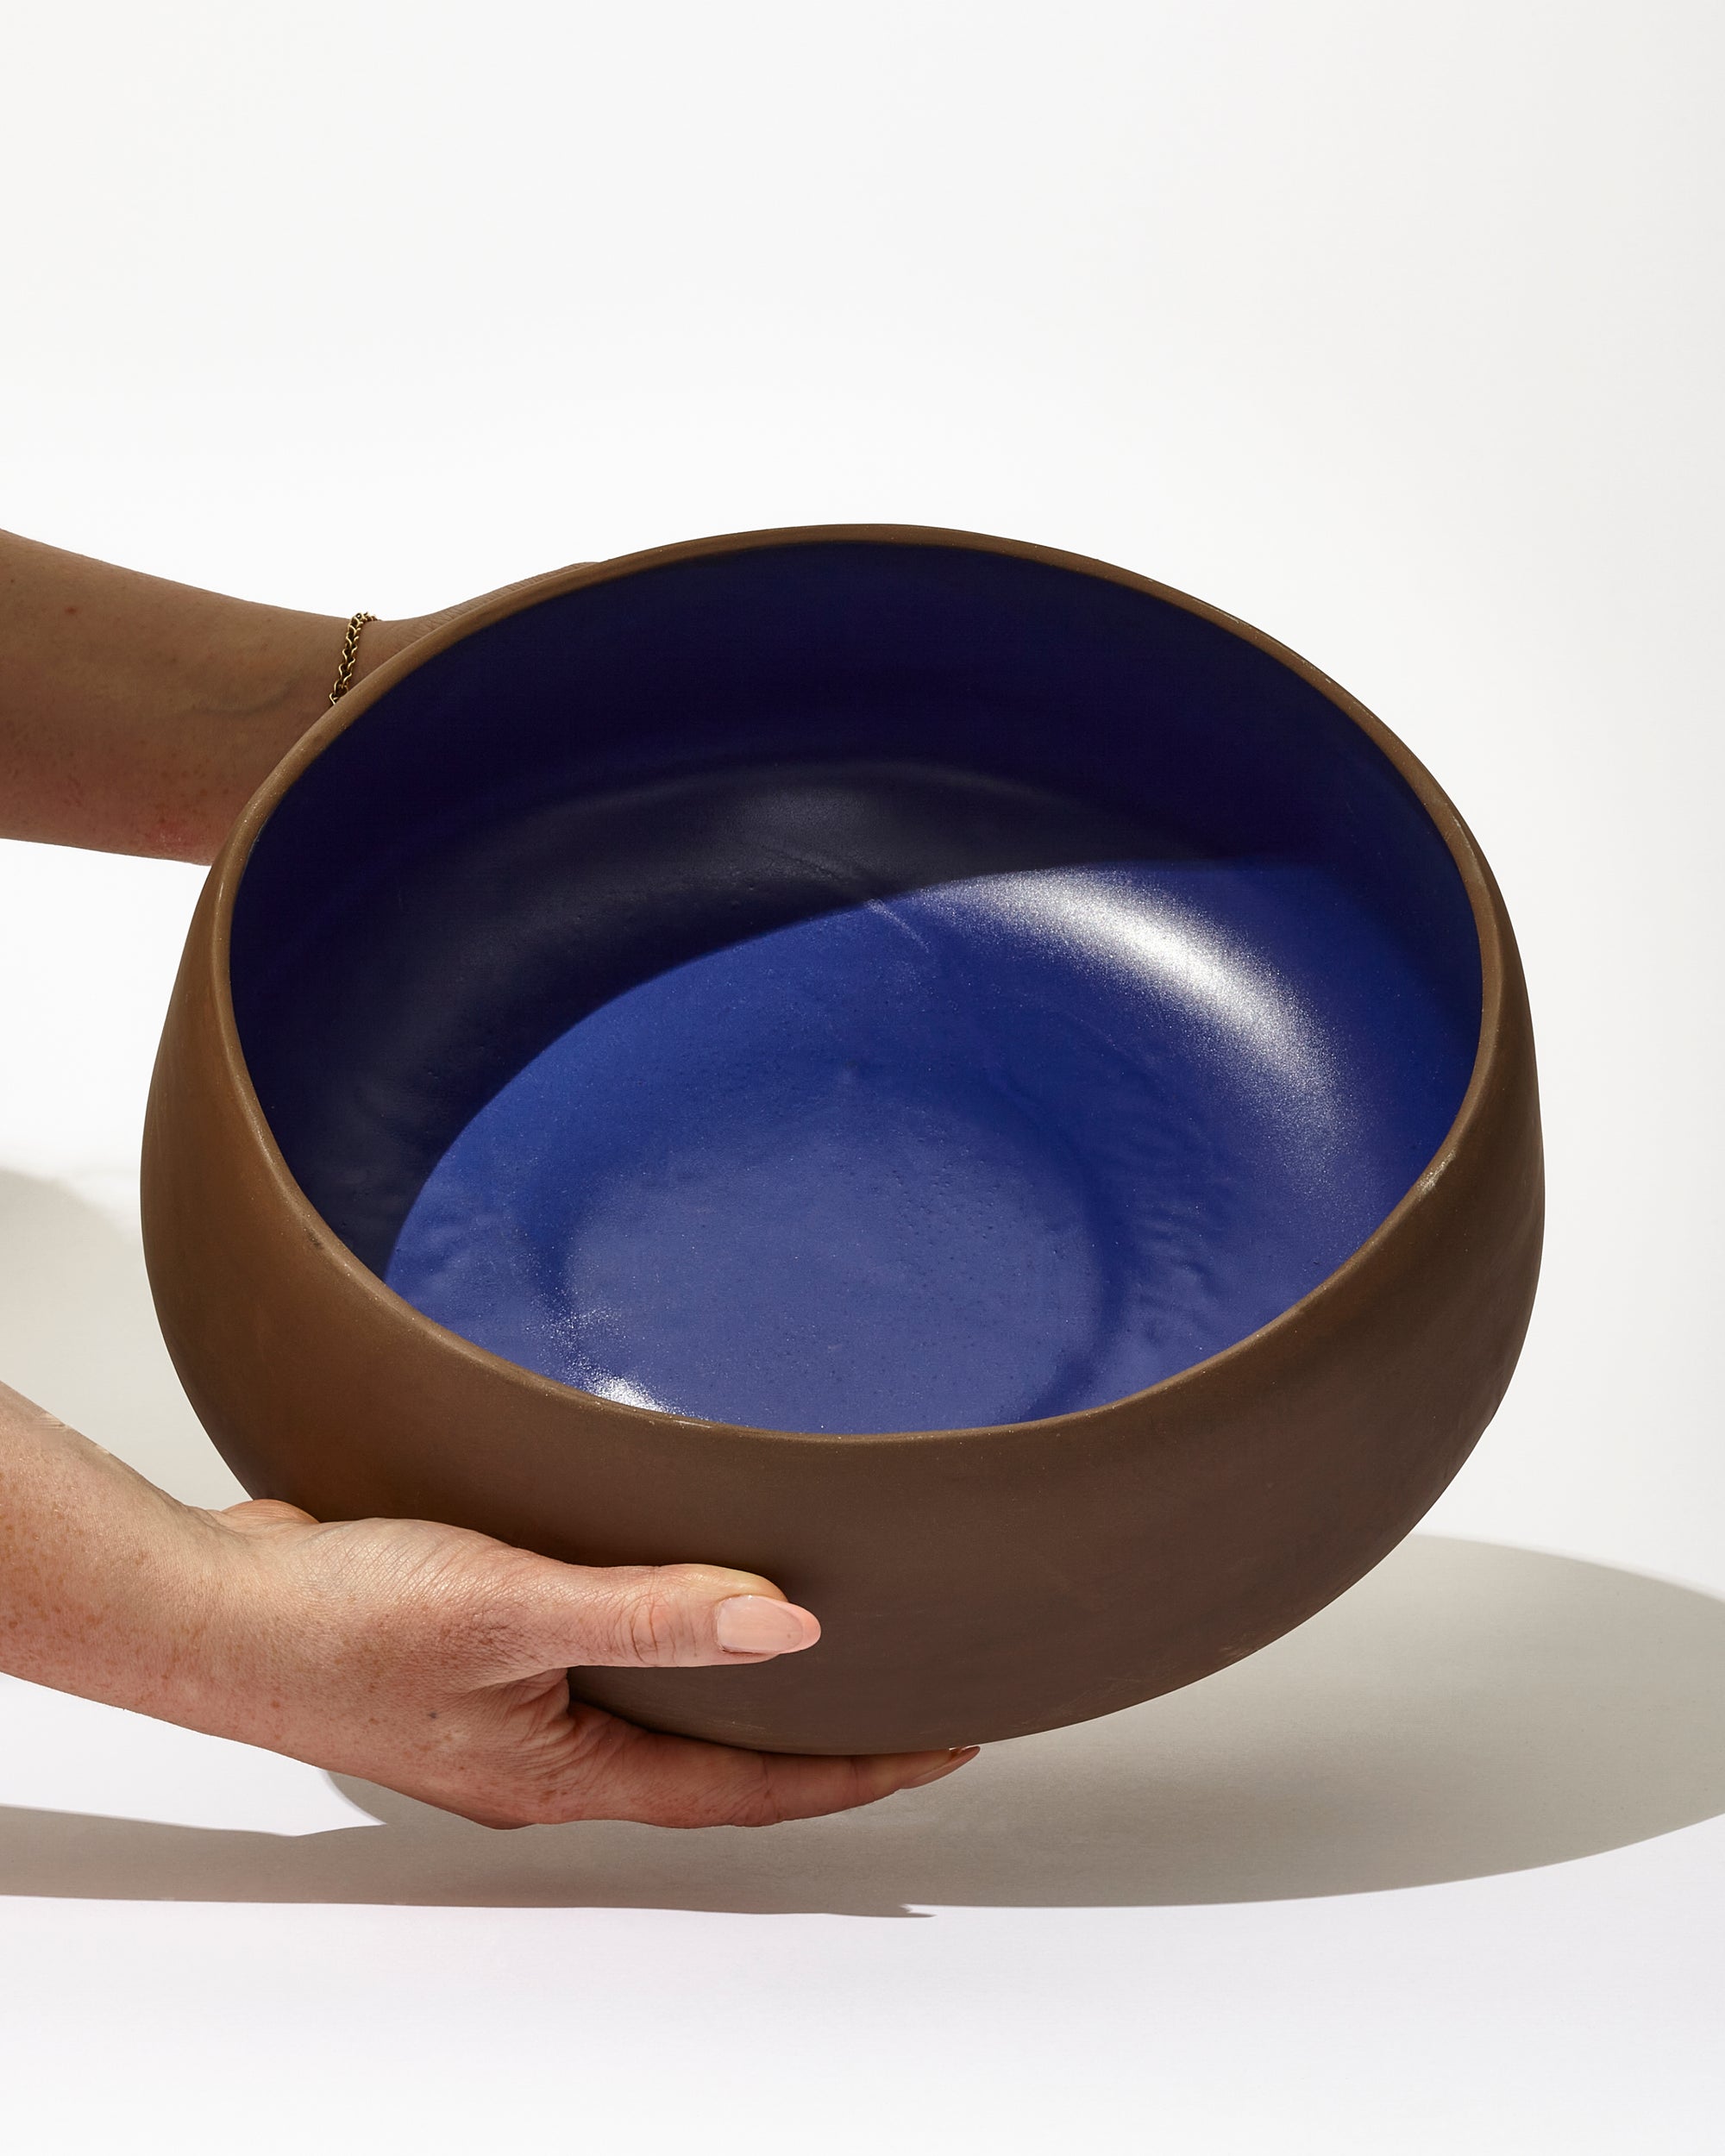 the large bowl